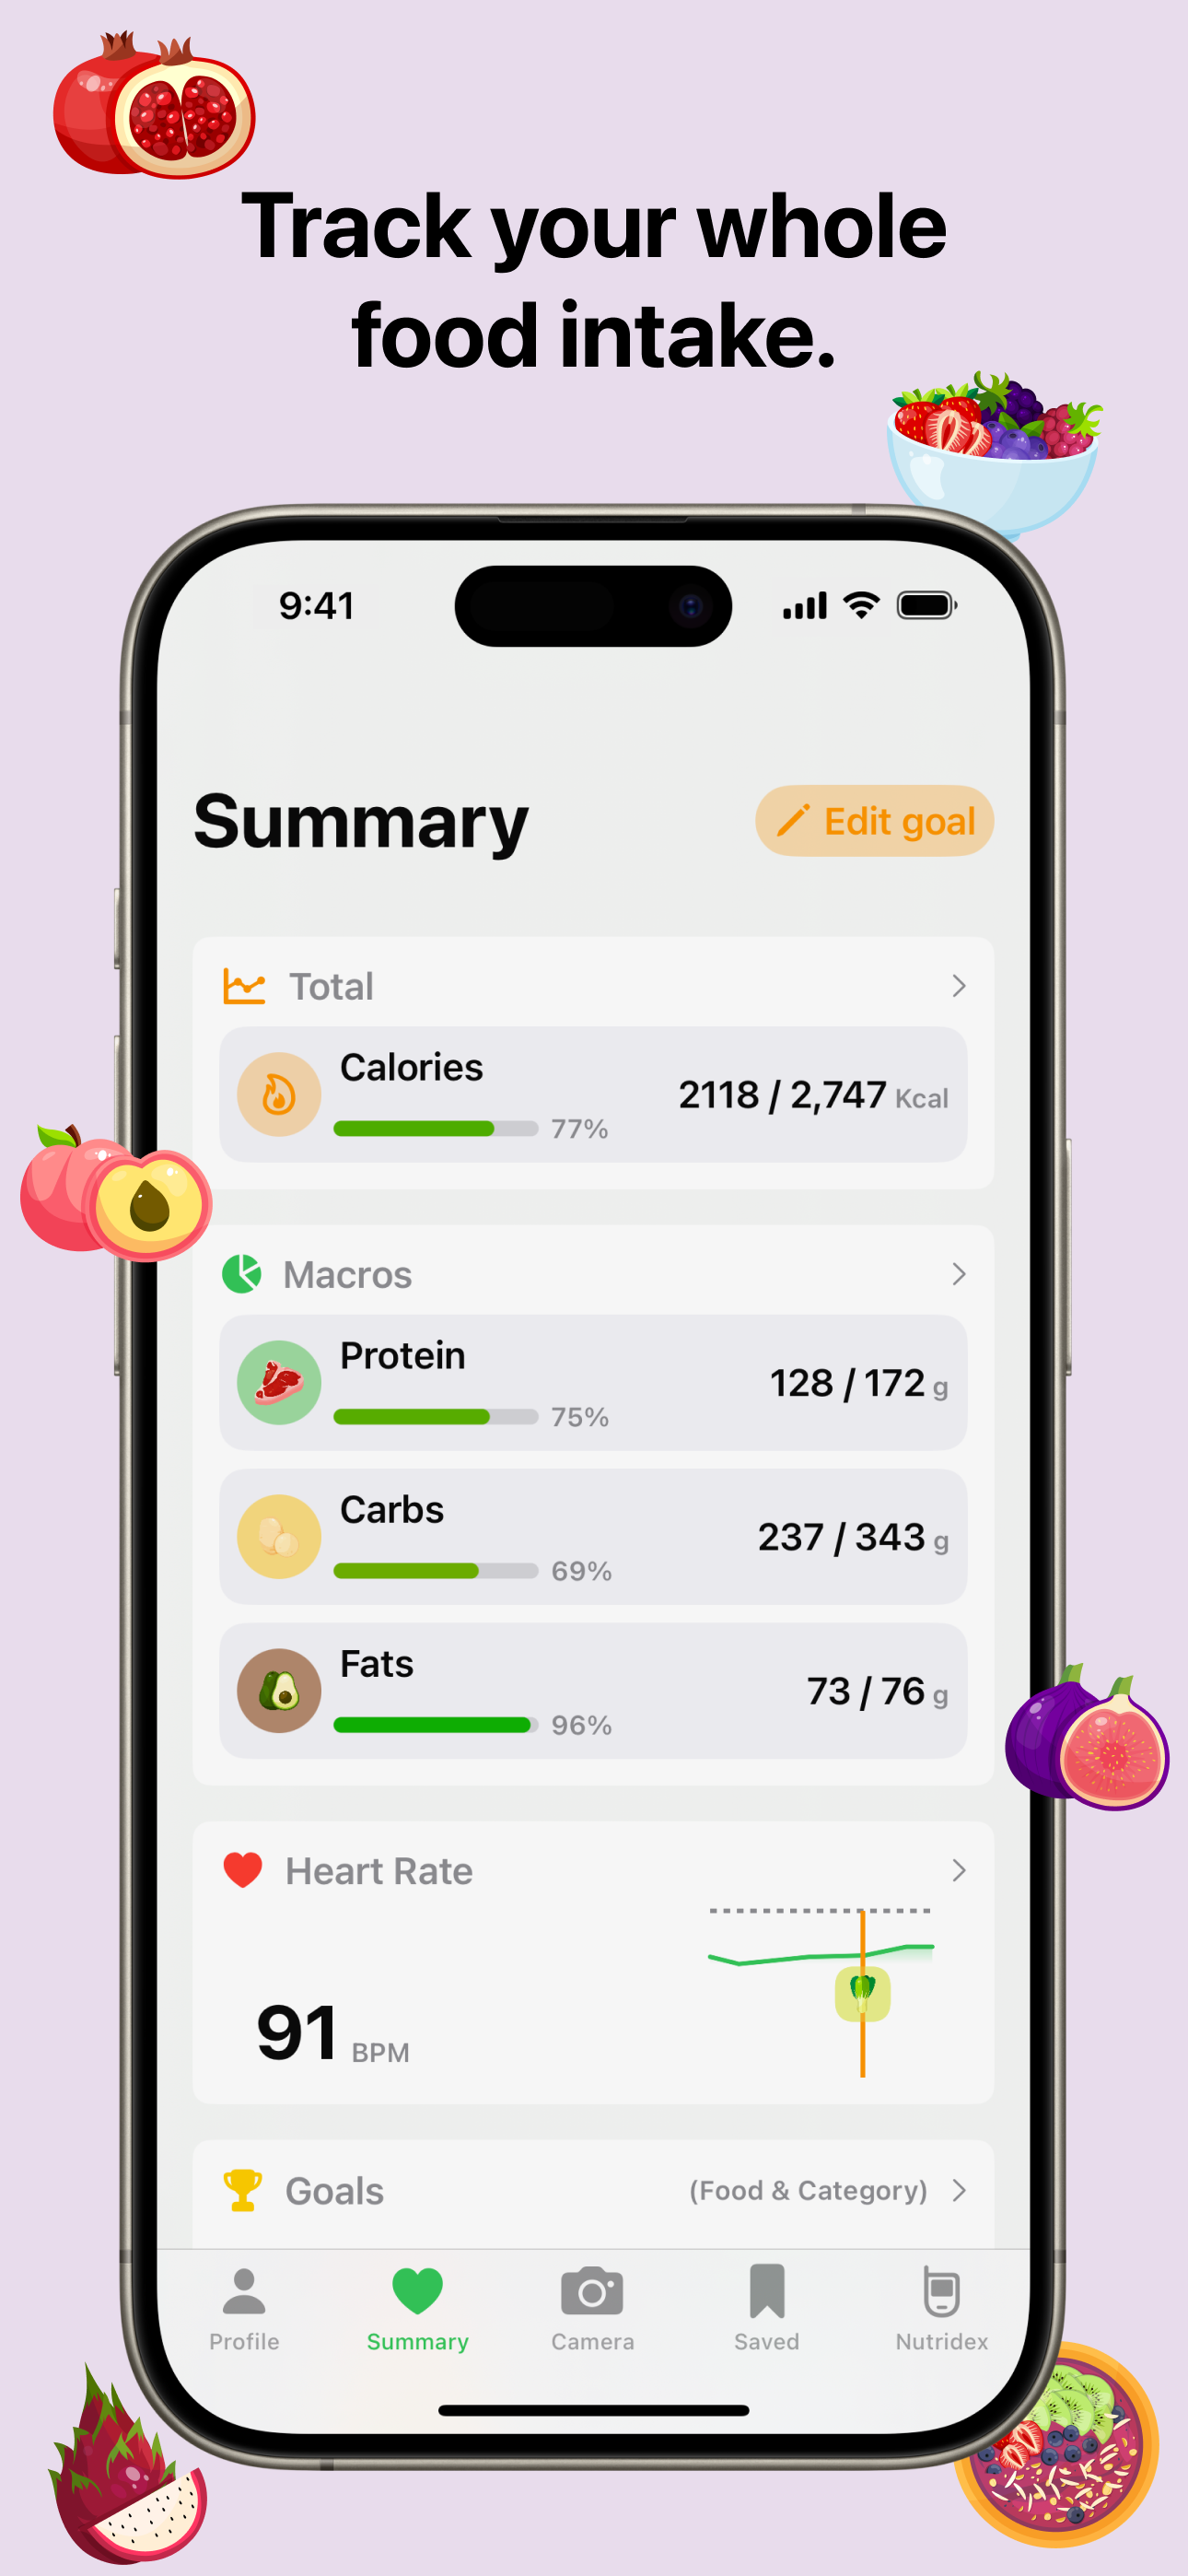 Nutrify app screenshot with the title 'Track your whole food intake.' The summary section shows calorie intake at 2118 out of 2747 kcal (77%), protein at 128 out of 172 grams (75%), carbs at 237 out of 343 grams (69%), and fats at 73 out of 76 grams (96%). It also shows a heart rate of 91 BPM. The app has tabs for Profile, Summary, Camera, Saved, and Nutridex at the bottom. The background is light purple with various fruit icons.